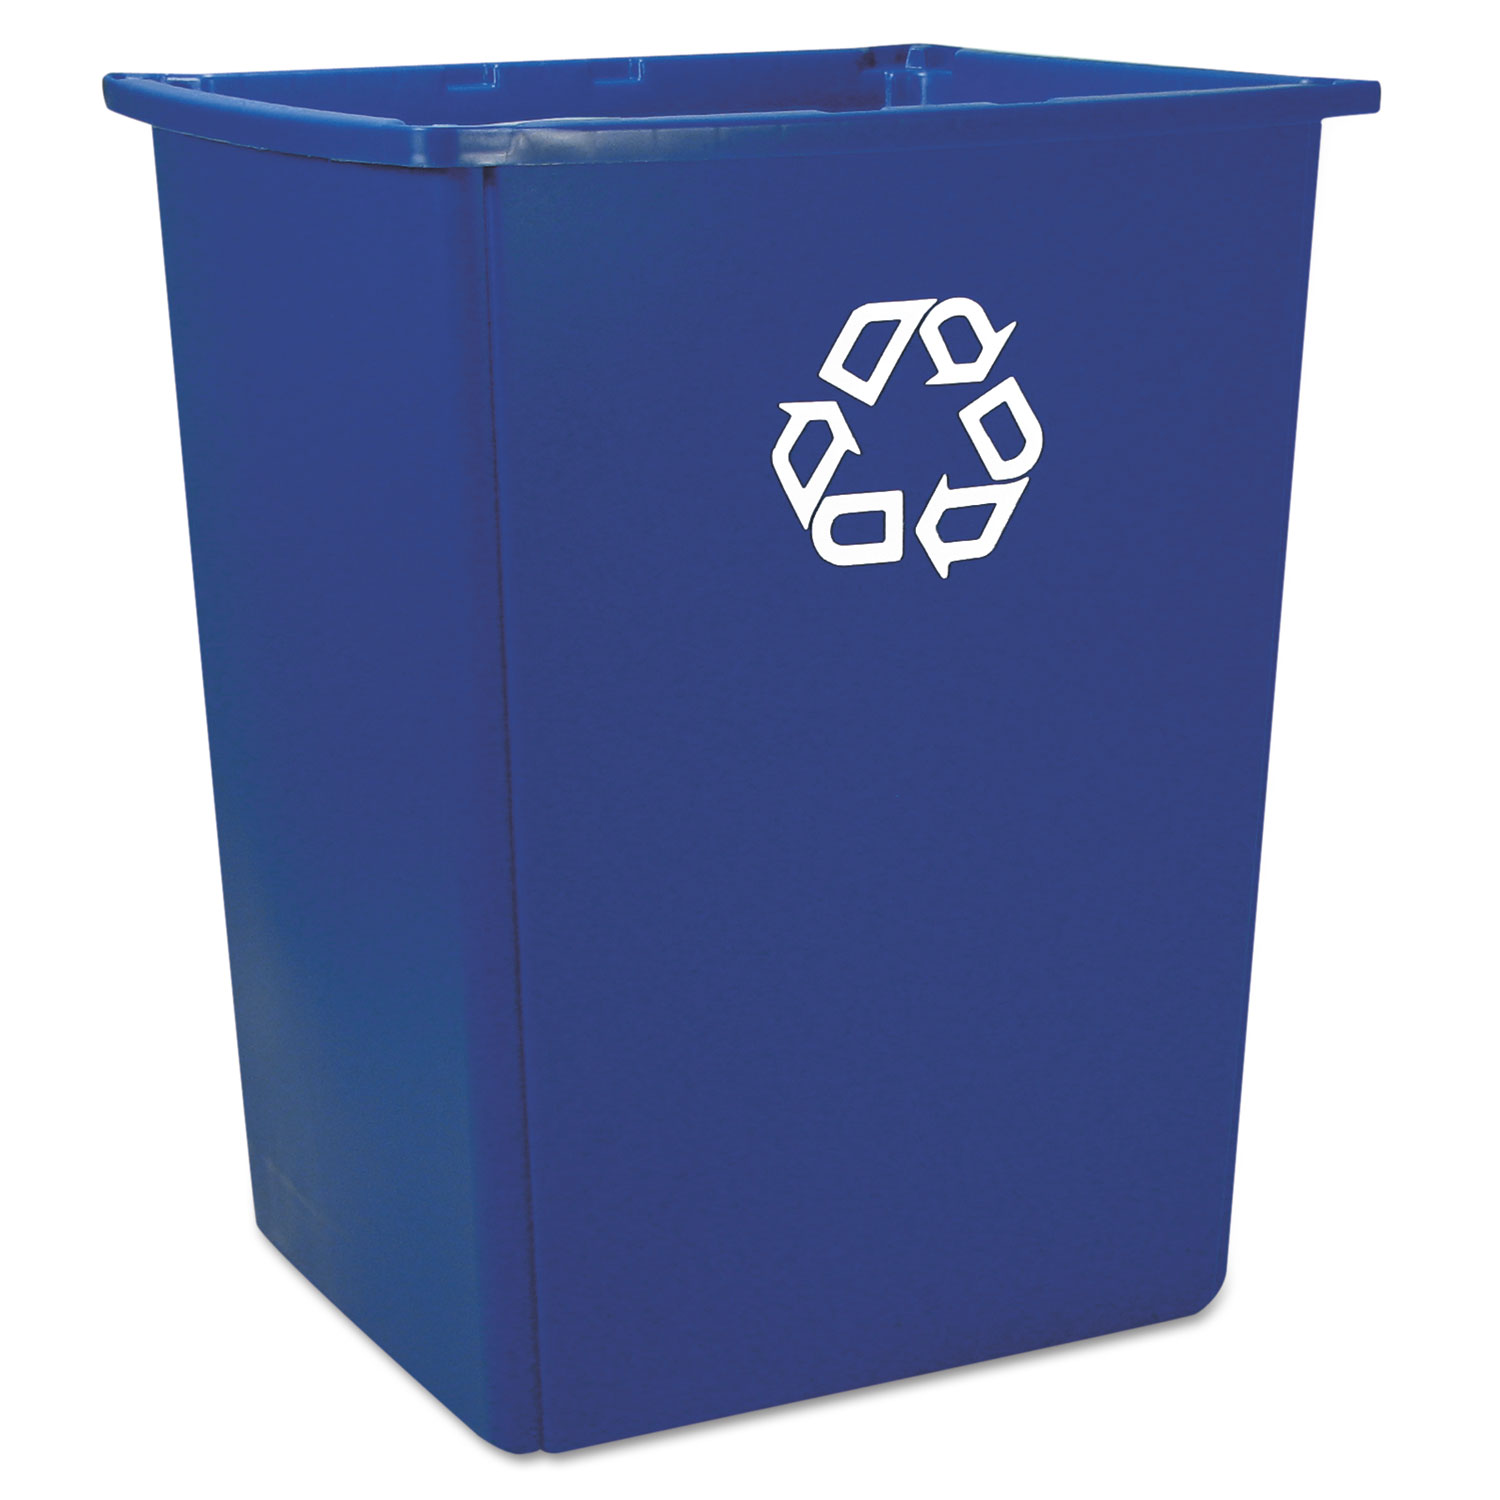  Rubbermaid Commercial FG256B73BLUE Glutton Recycling Container, Rectangular, 56 gal, Blue (RCP256B73BLU) 